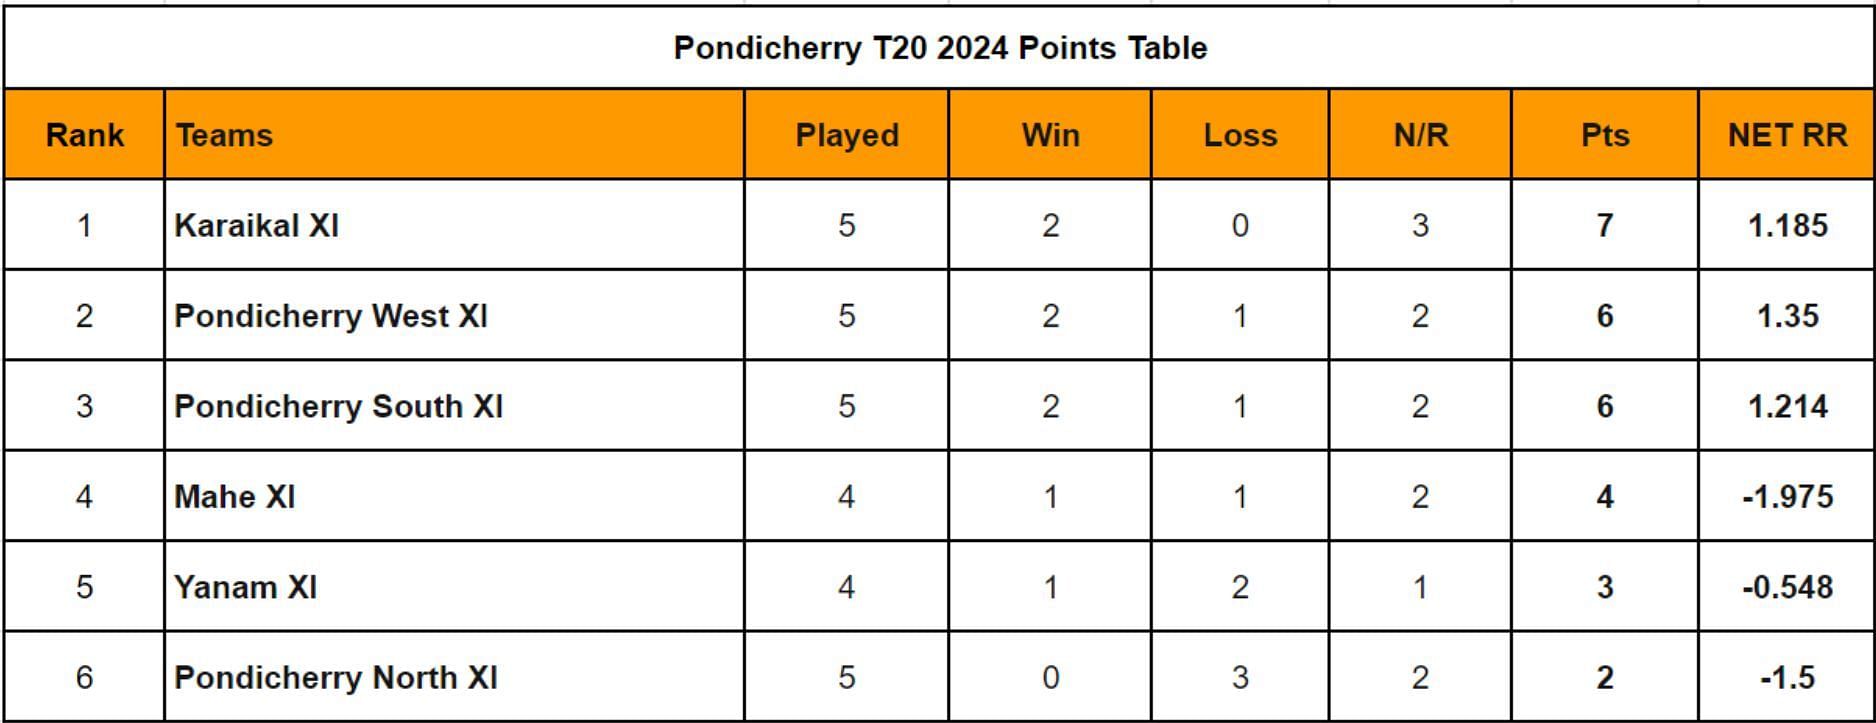 Pondicherry T20 2024 Points Table Updated standings after Match 14